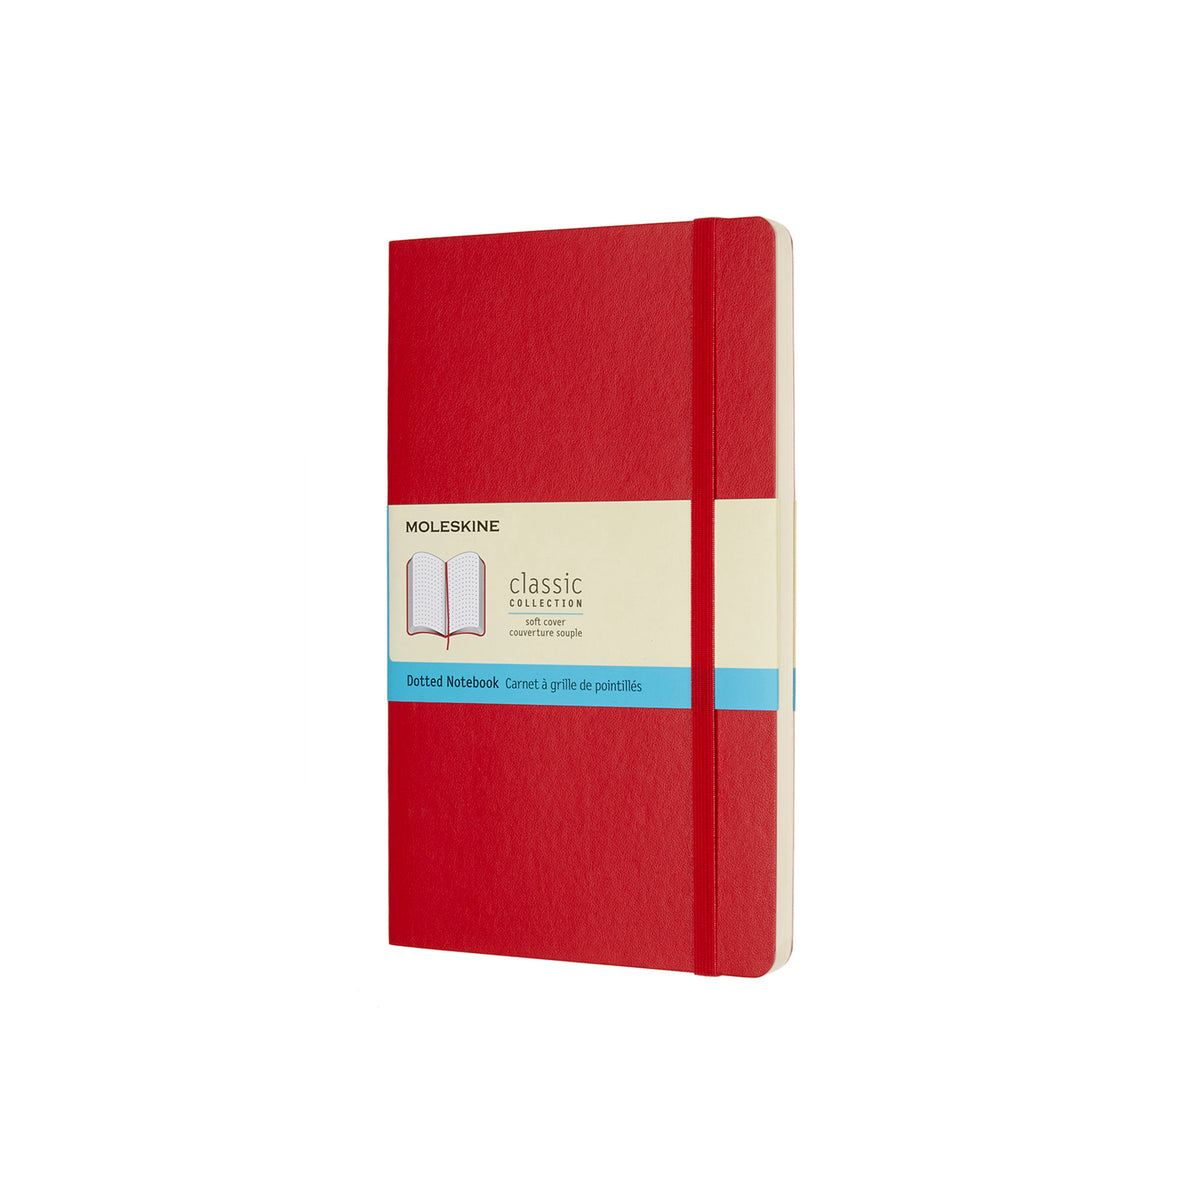 Moleskine - Classic Soft Cover Notebook - Dot Grid - Large - Scarlet Red